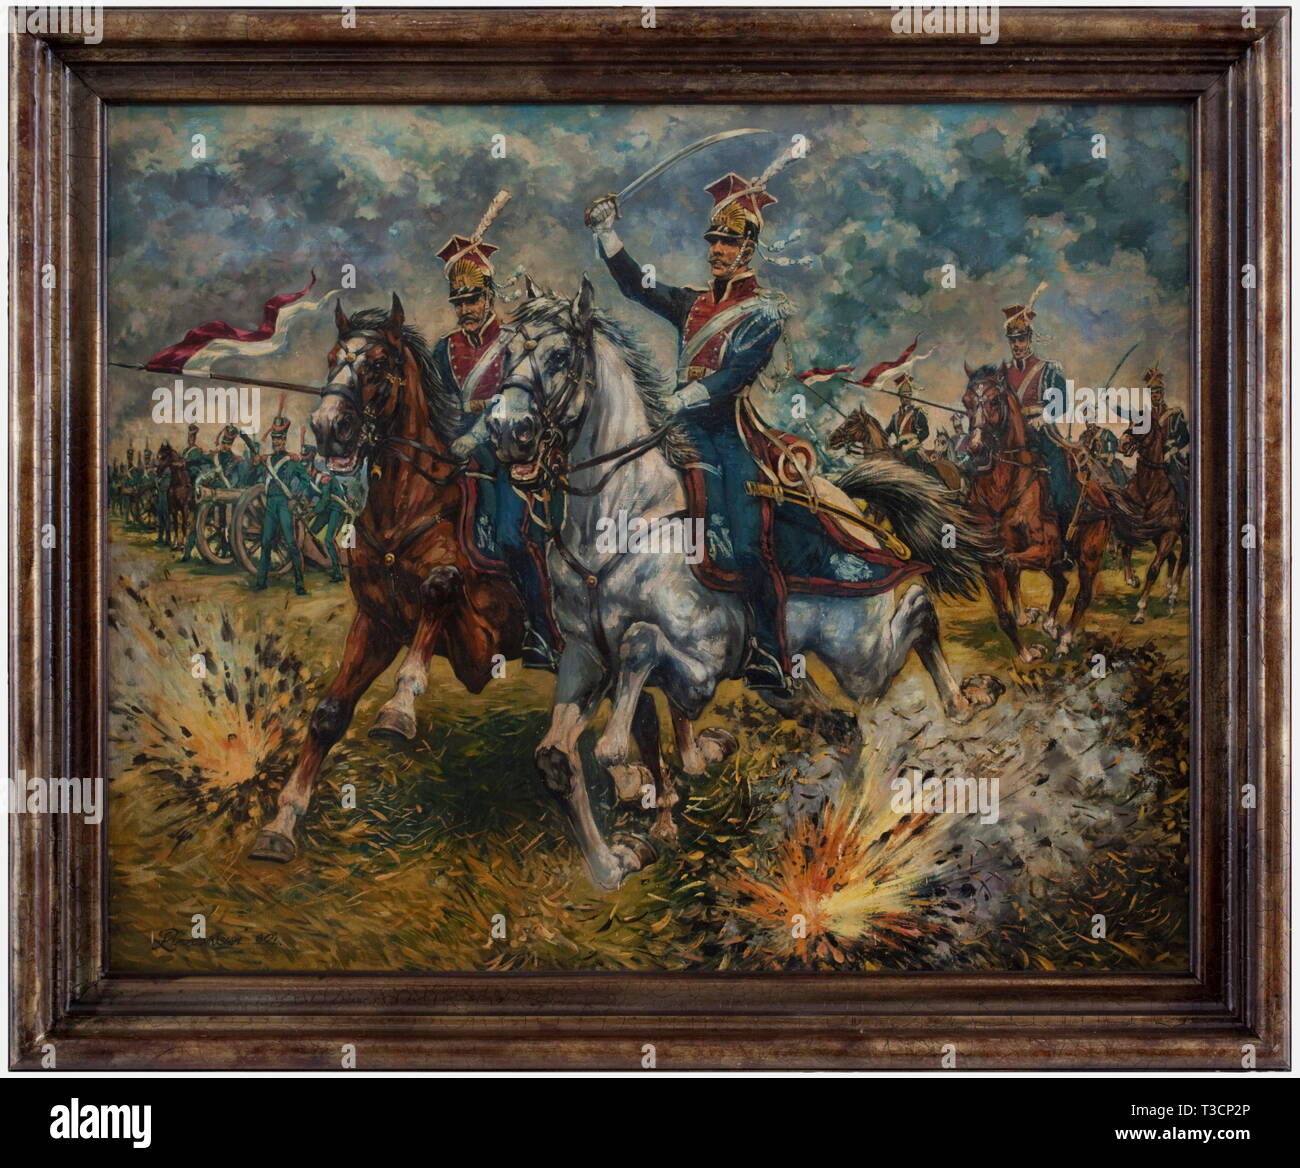 Ruszczinski, Attack of the Polish Legion Lancers Oil on canvas, dimensions of the picture 79 x 100 cm, signed on the lower left 'Ruszczinski 80', framed. Dynamic depiction of attacking lancers during the Napoleonic Wars, on the left battery of the French artillery, in the foreground grenade impacts. The light Polish cavalry fighting for the French troops impressed Napoleon very much due to their bravery. historic, historical, people, 19th century, painting, paintings, fine arts, art, illustration, man, men, male, Additional-Rights-Clearance-Info-Not-Available Stock Photo